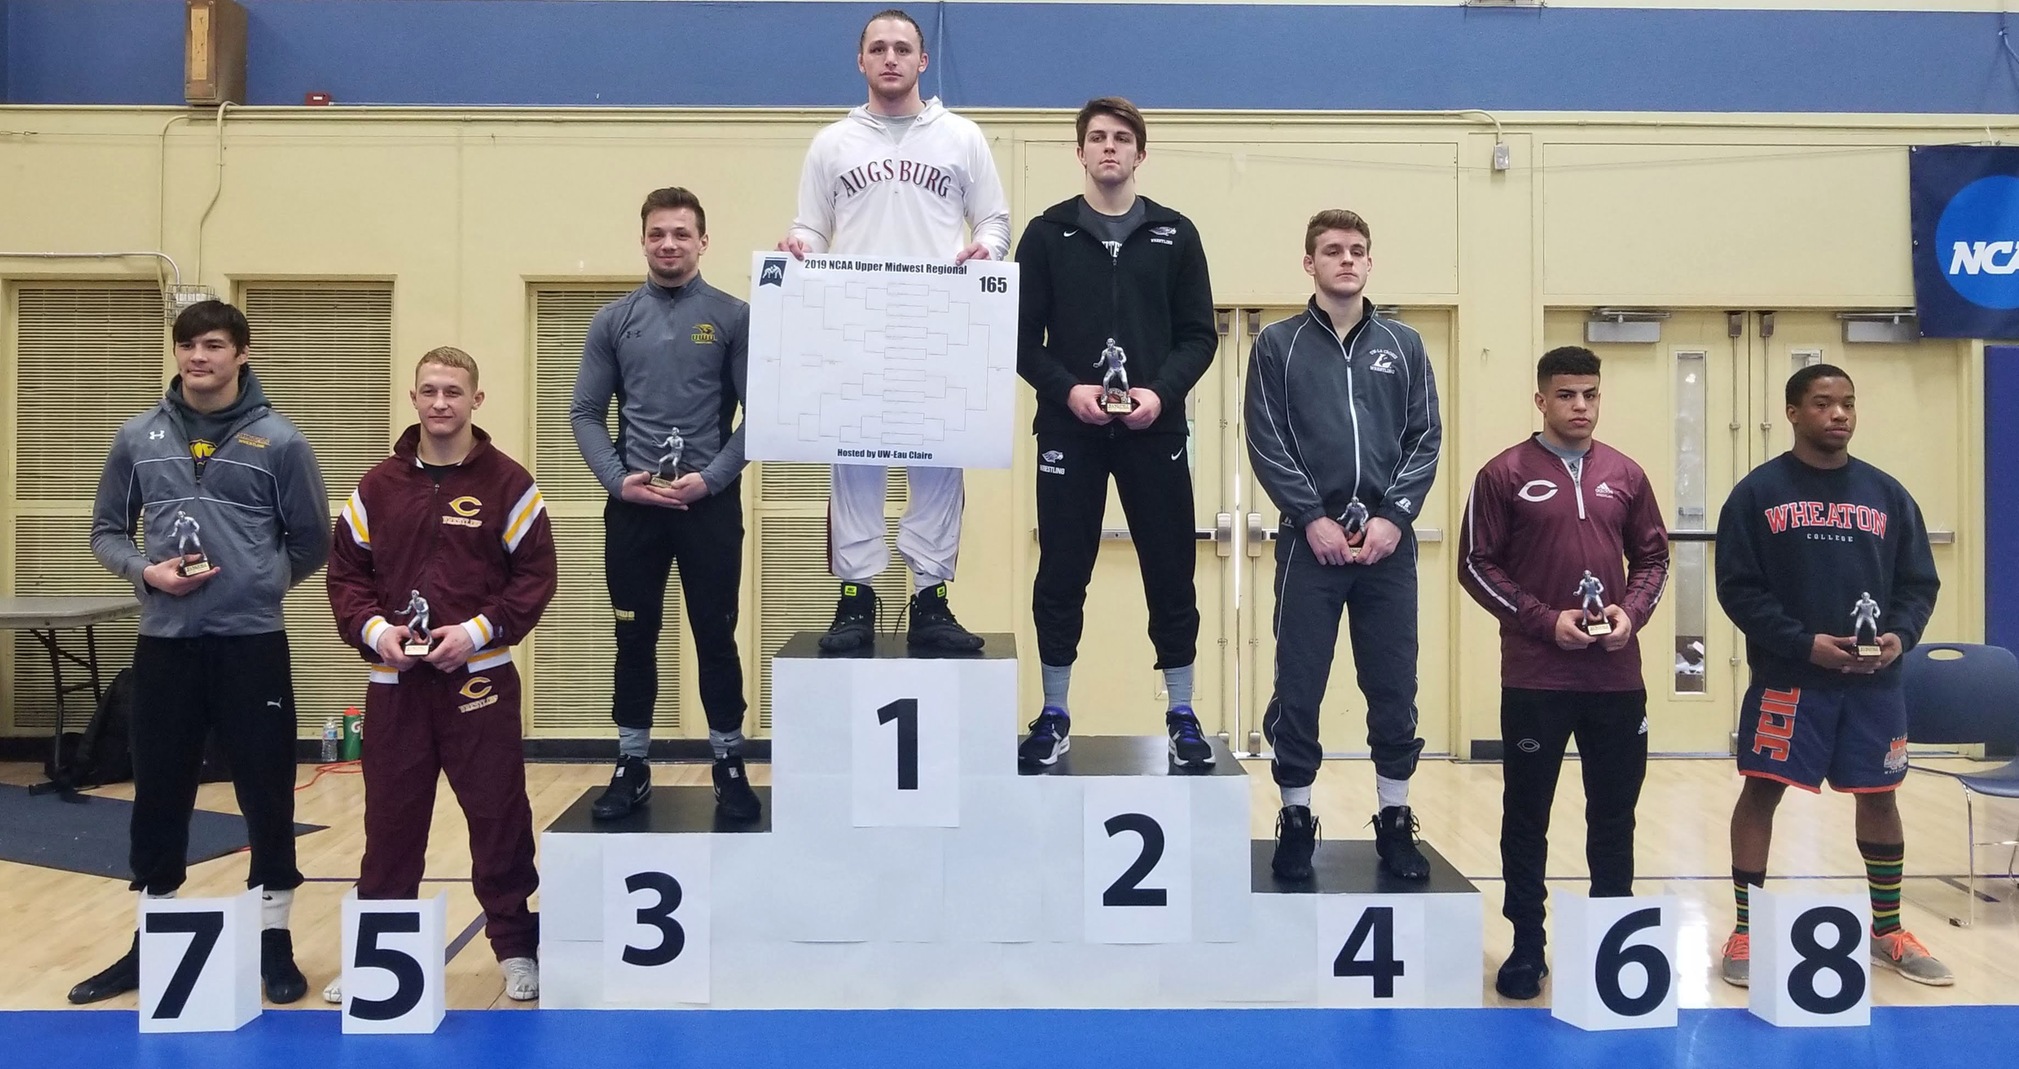 Mark Choinski placed third at the Upper Midwest Regional to earn his third national championship visit.